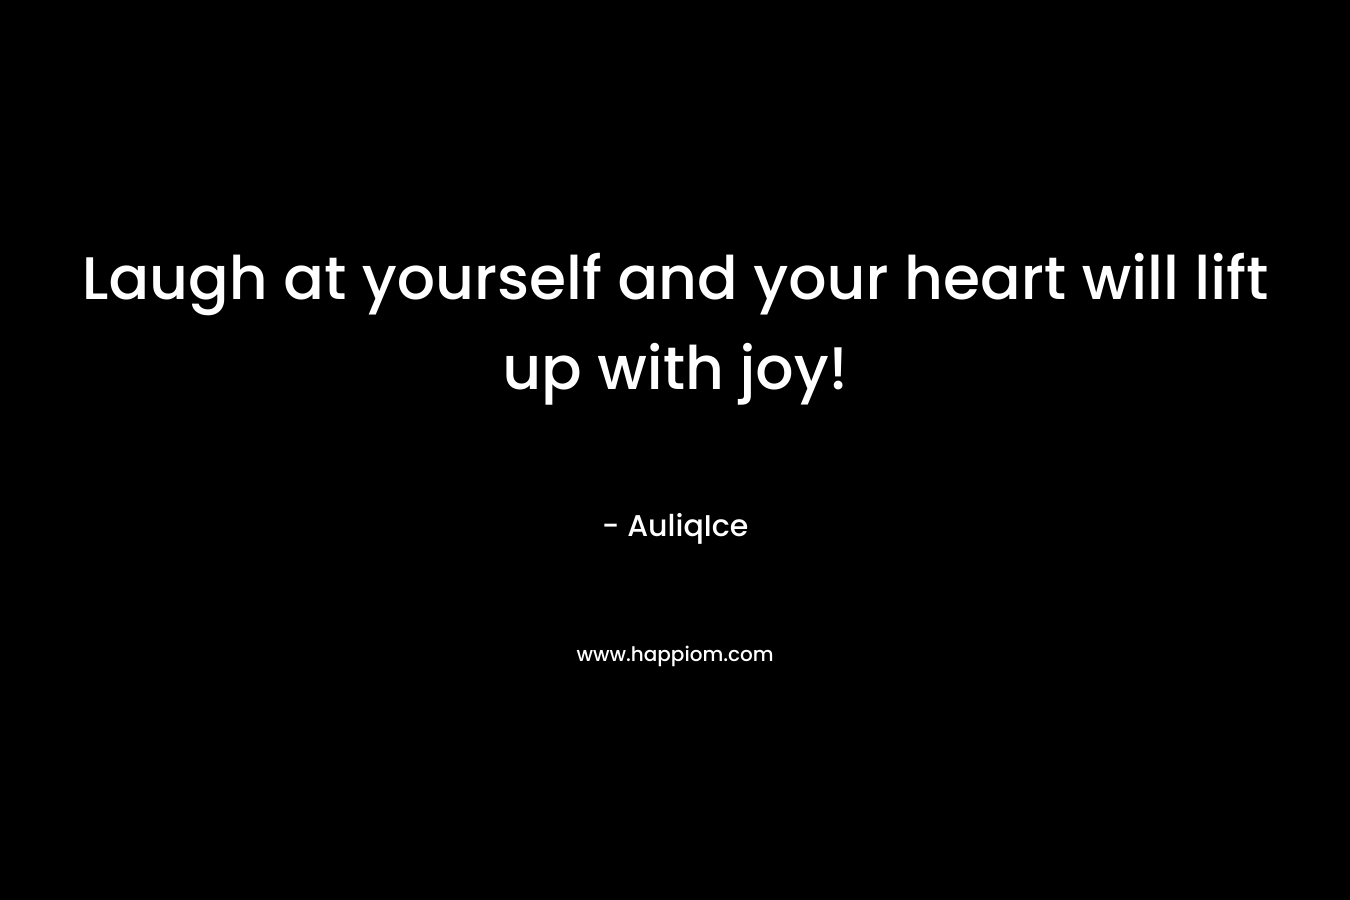 Laugh at yourself and your heart will lift up with joy!